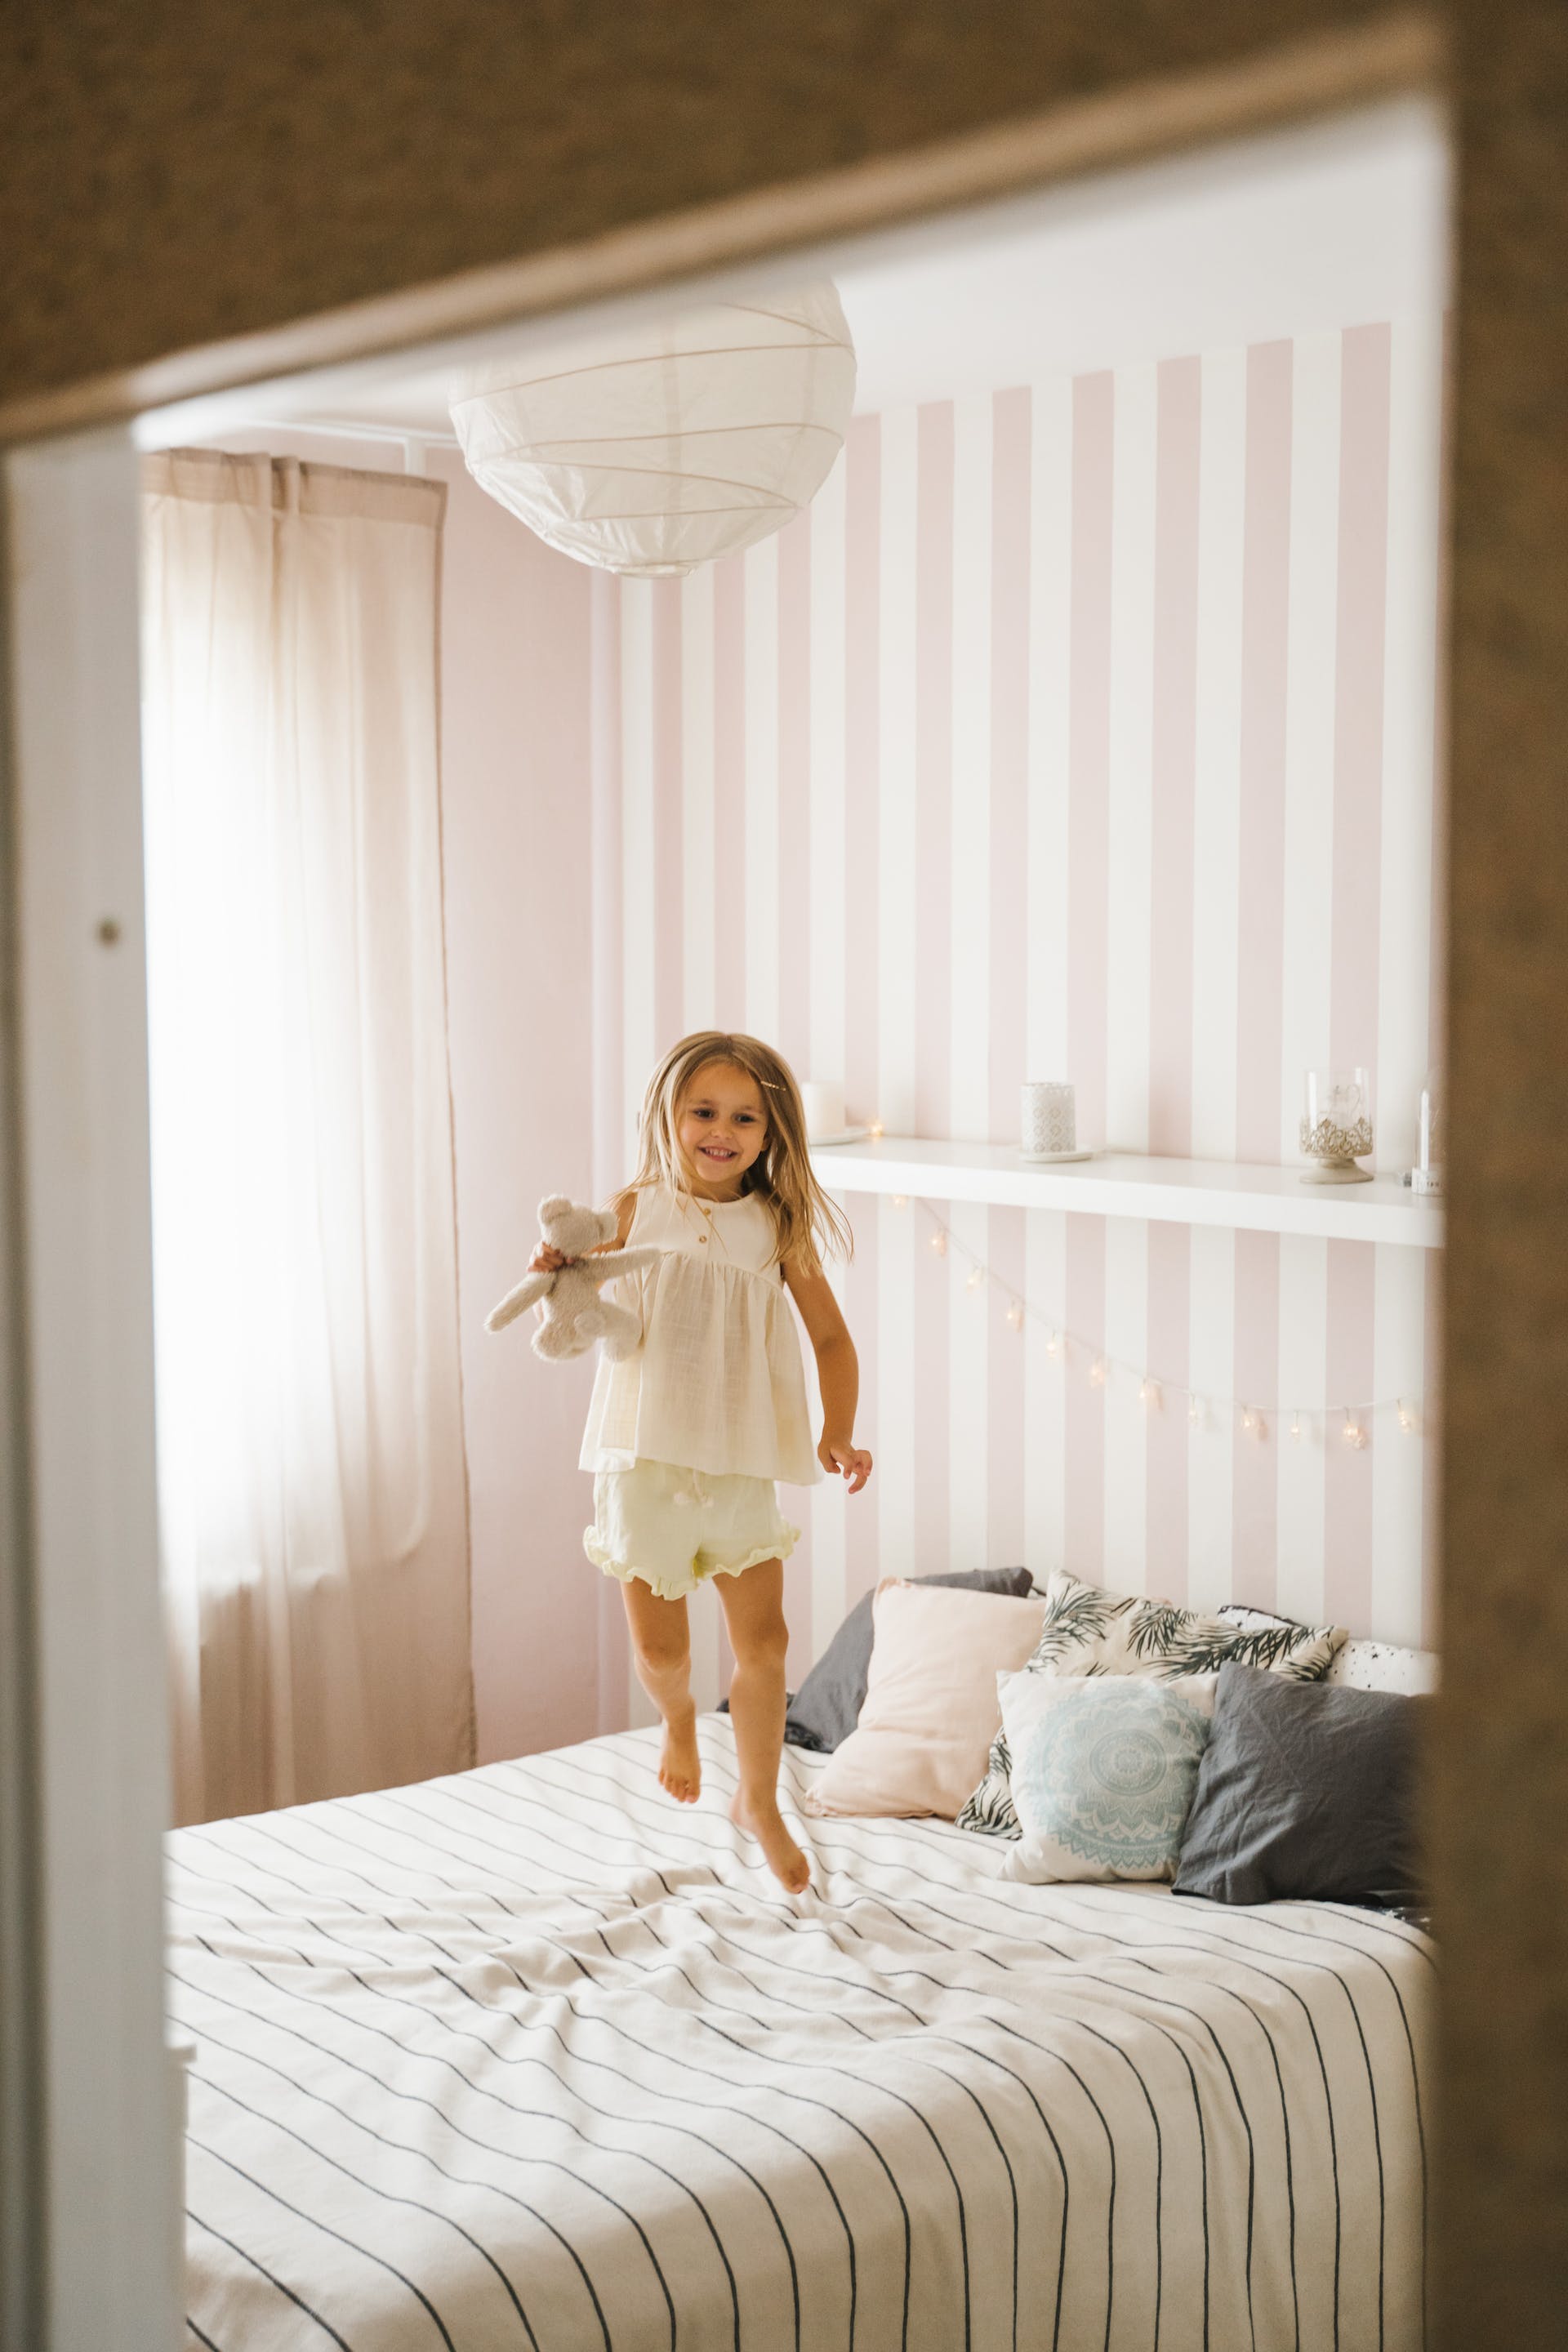 A girl jumping on the bed | Source: Pexels